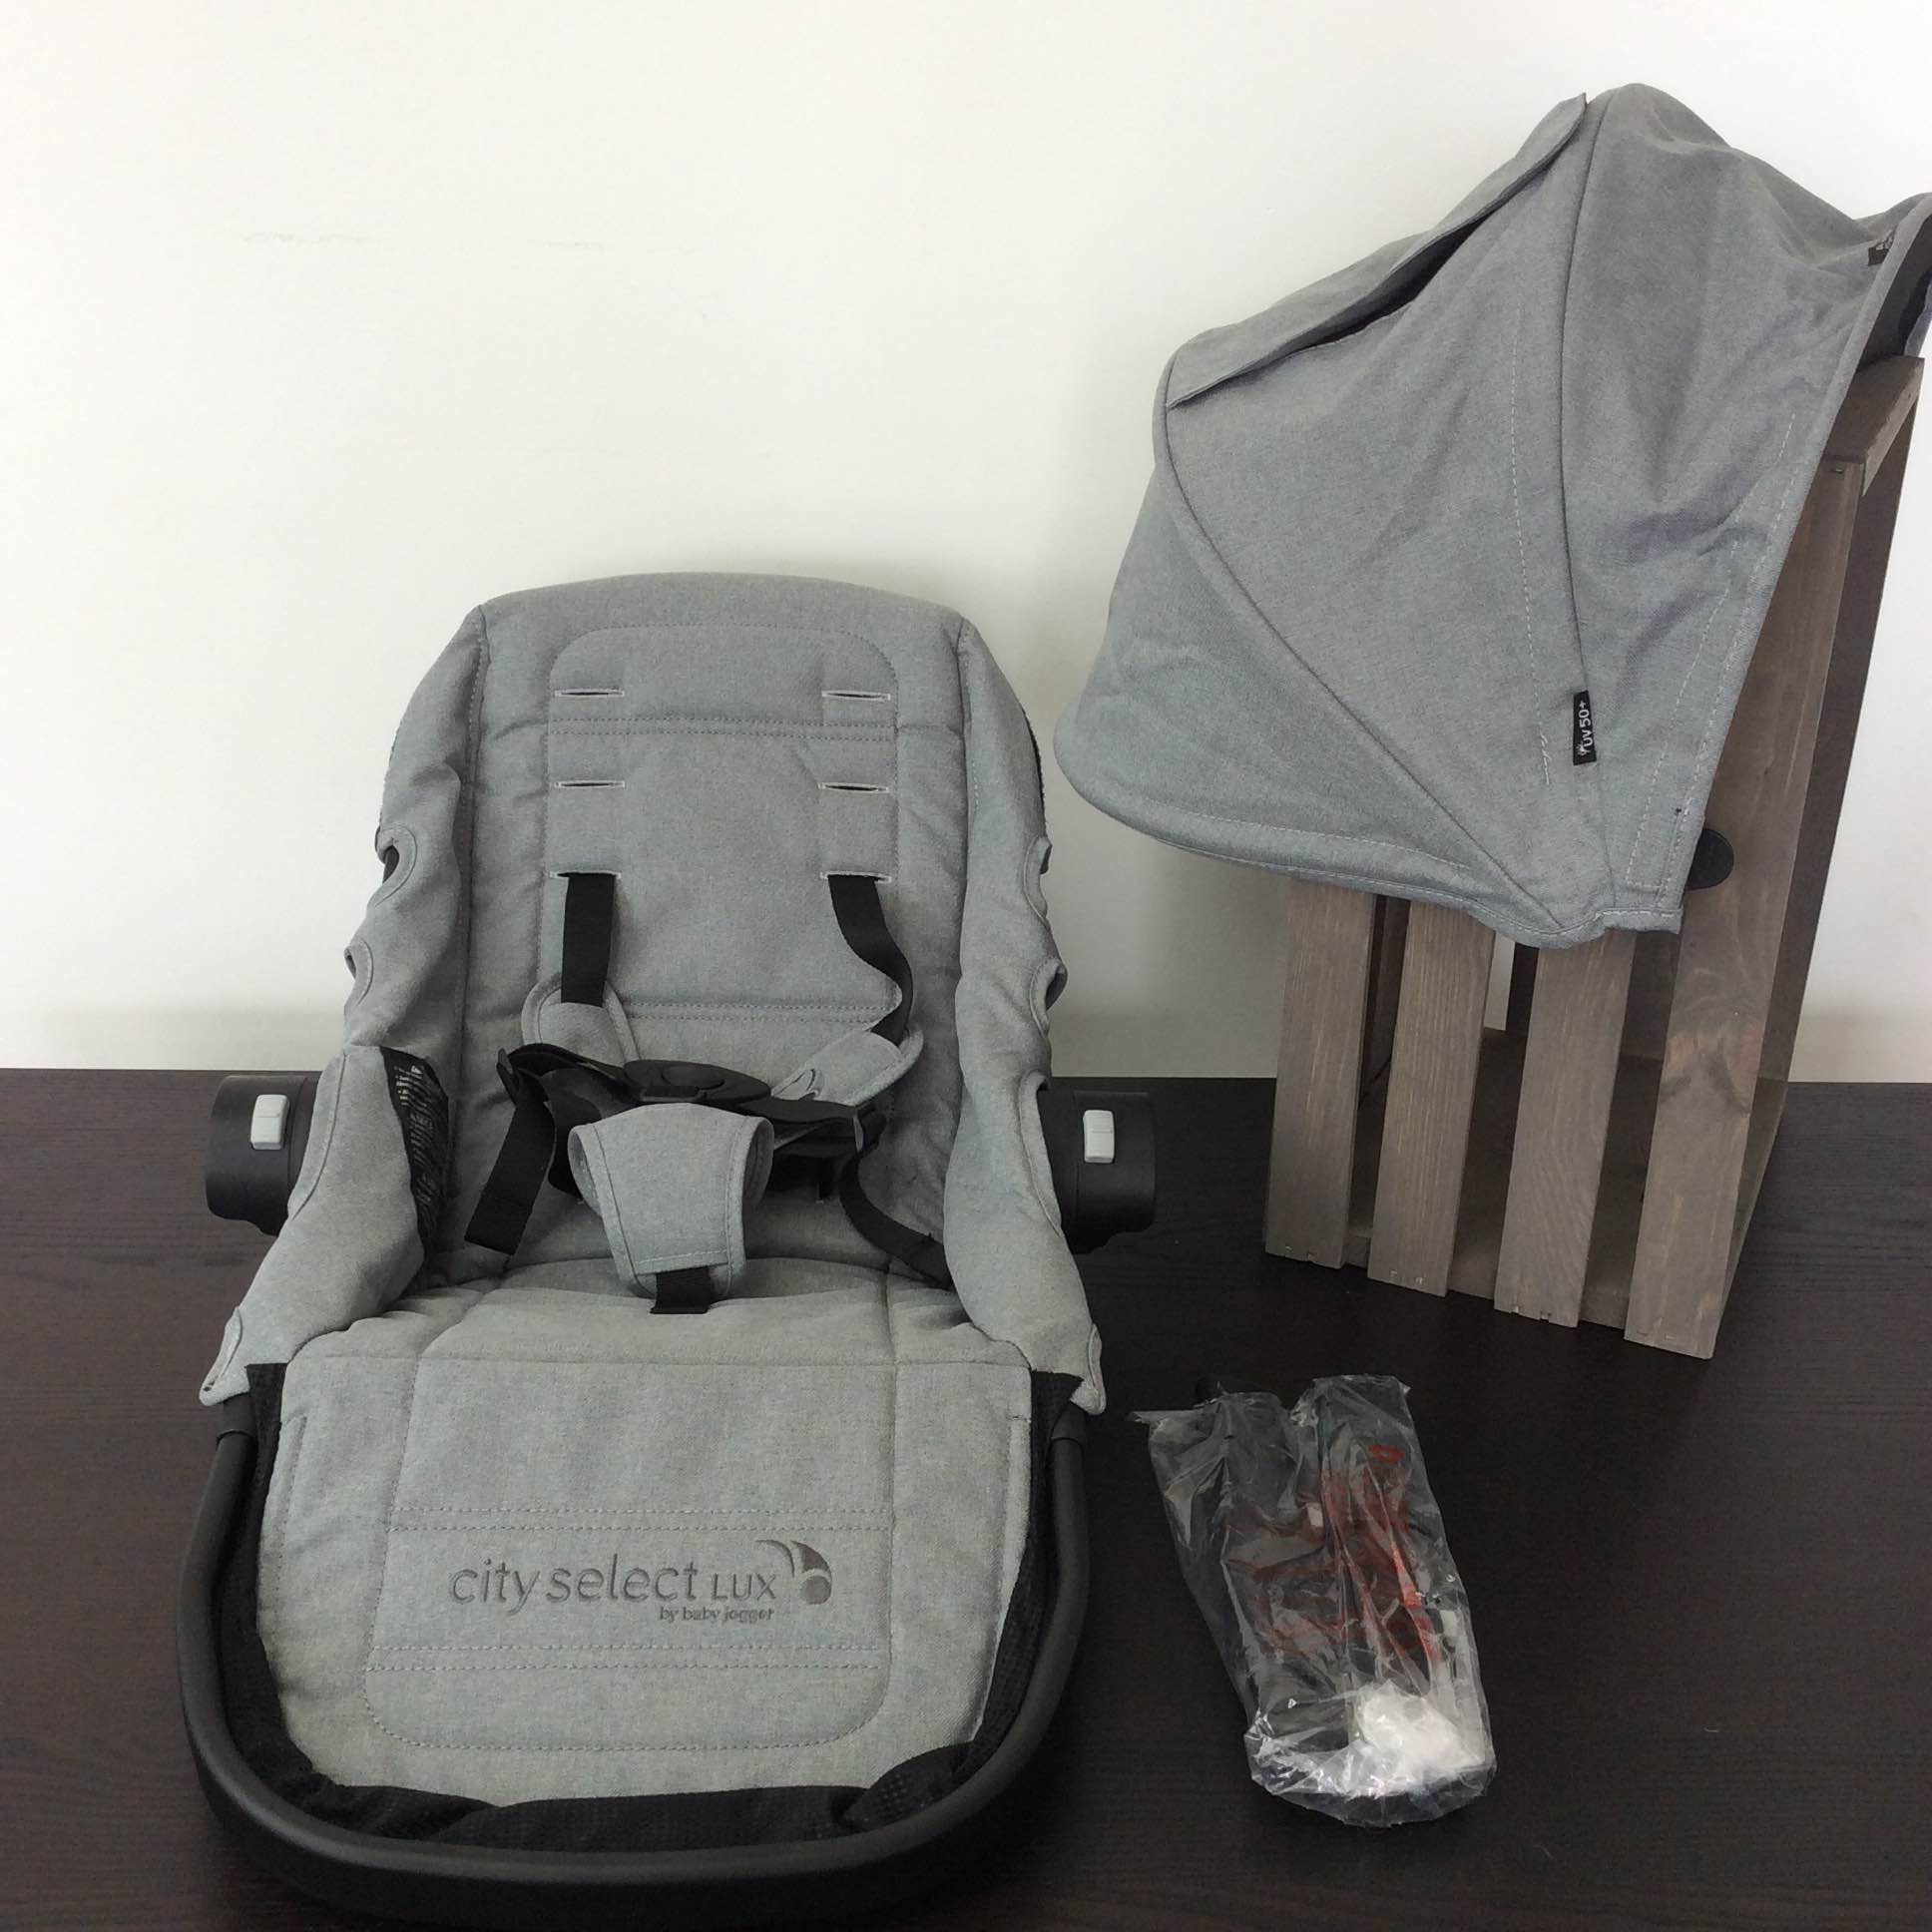 city select lux travel bag